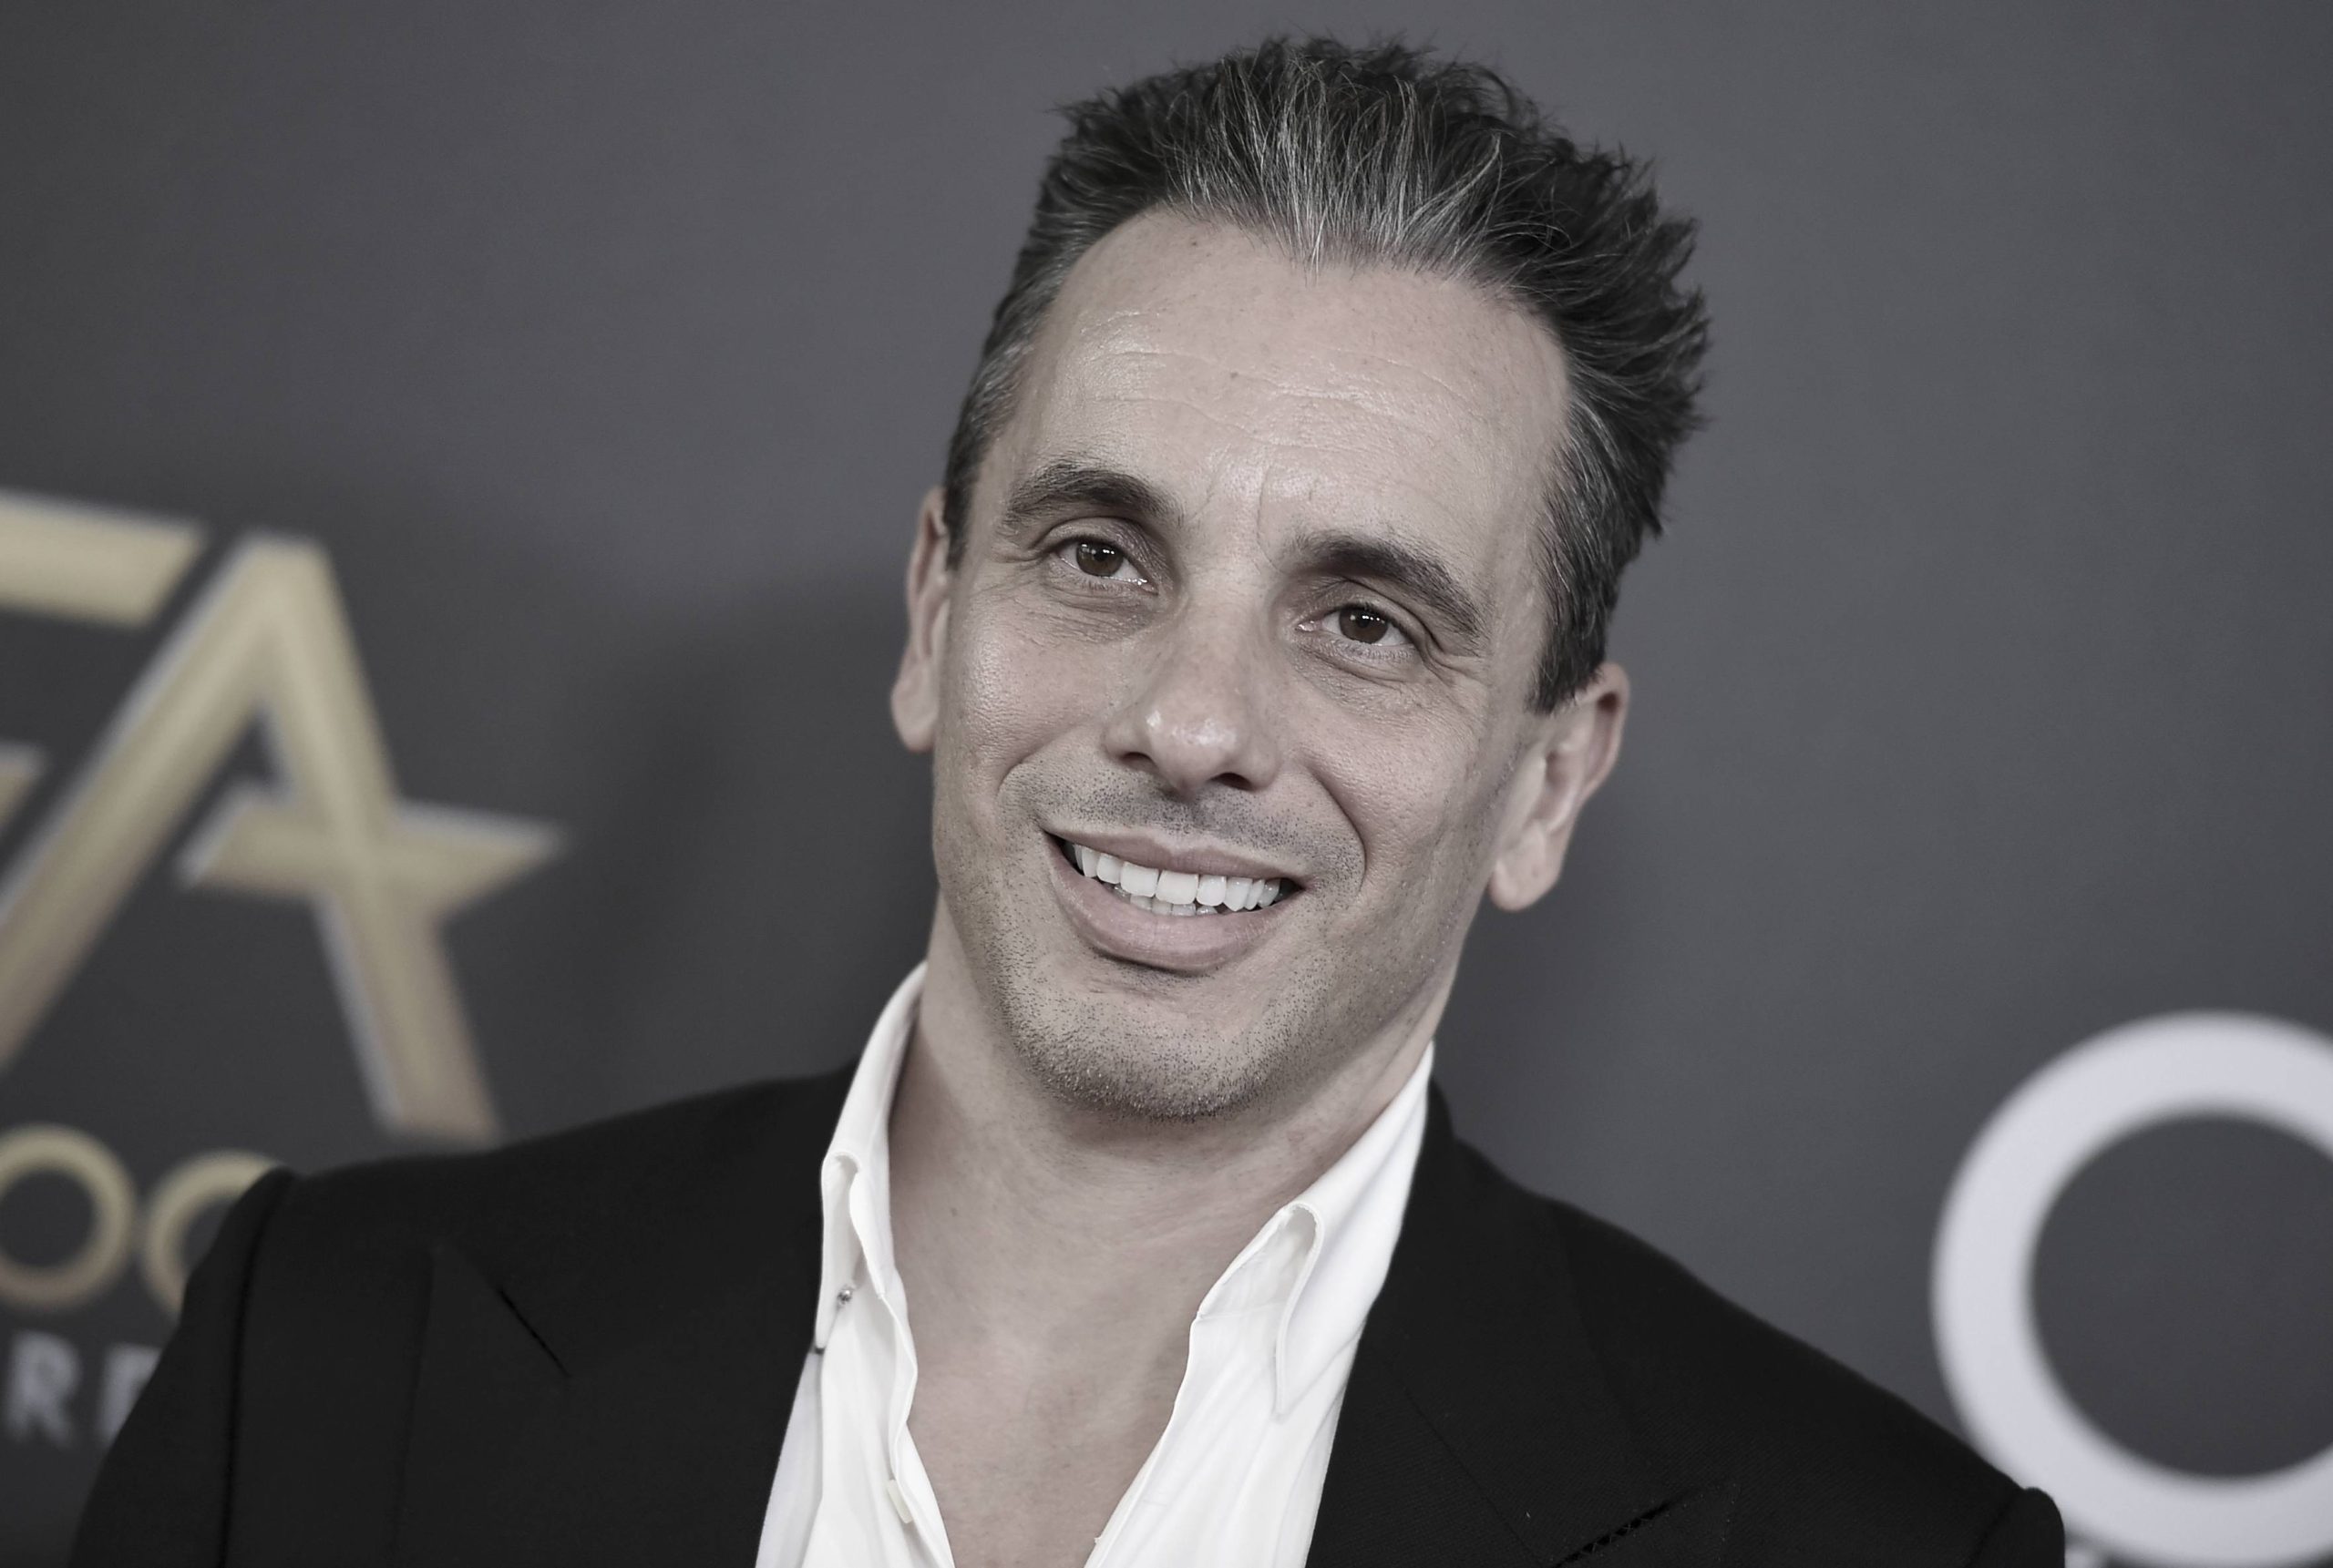 Get to Know Sebastian Maniscalco: Biography, Net Worth, Family Members ...